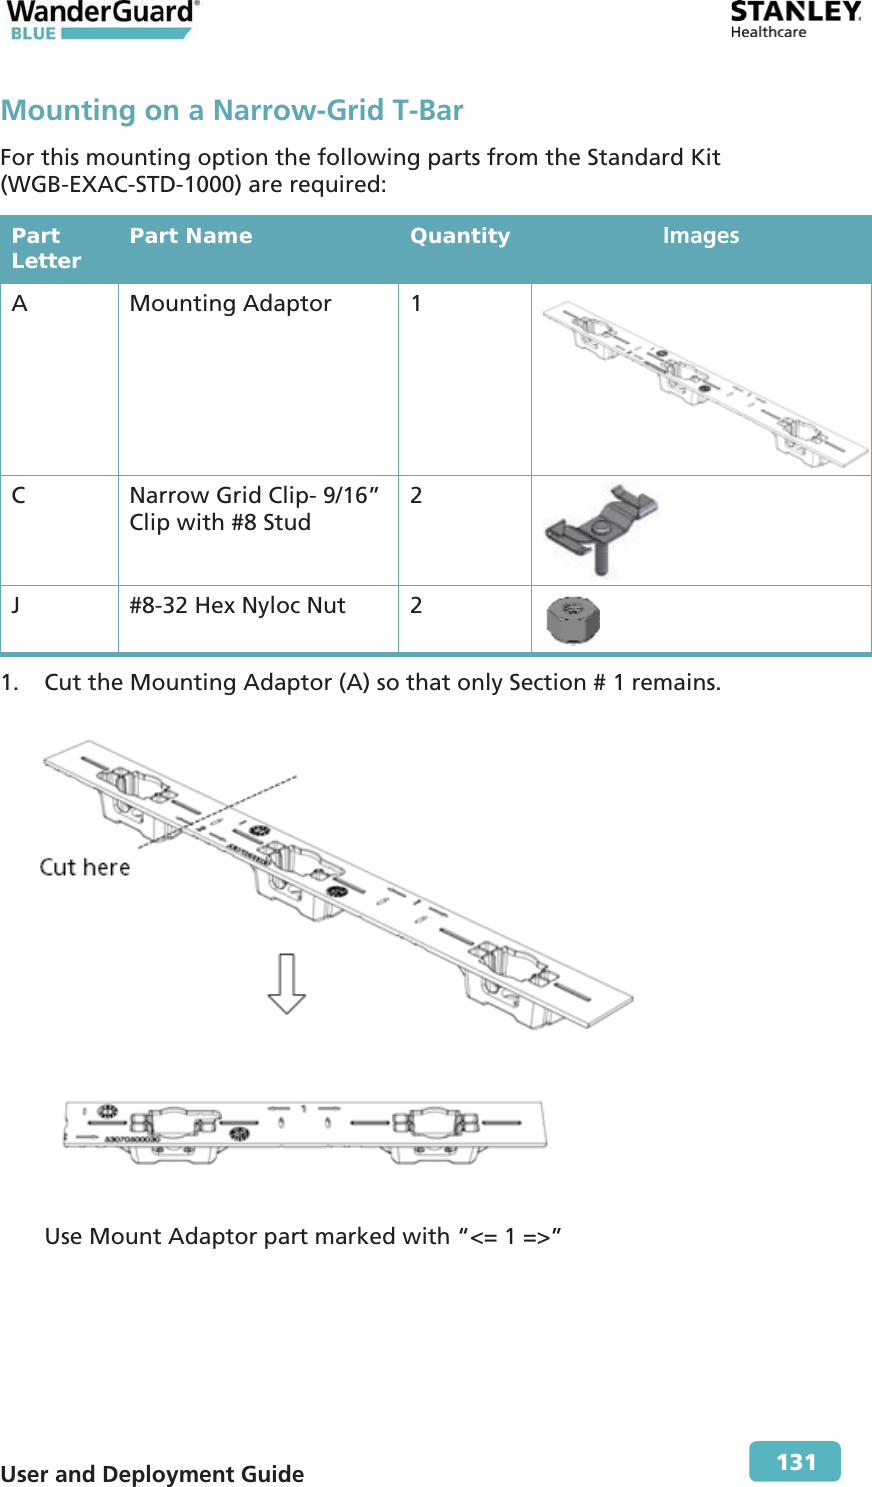  User and Deployment Guide        131 Mounting on a Narrow-Grid T-Bar For this mounting option the following parts from the Standard Kit (WGB-EXAC-STD-1000) are required: Part Letter  Part Name  Quantity  Images A Mounting Adaptor 1  C  Narrow Grid Clip- 9/16” Clip with #8 Stud 2  J  #8-32 Hex Nyloc Nut  2  1. Cut the Mounting Adaptor (A) so that only Section # 1 remains.  Use Mount Adaptor part marked with “&lt;= 1 =&gt;” 